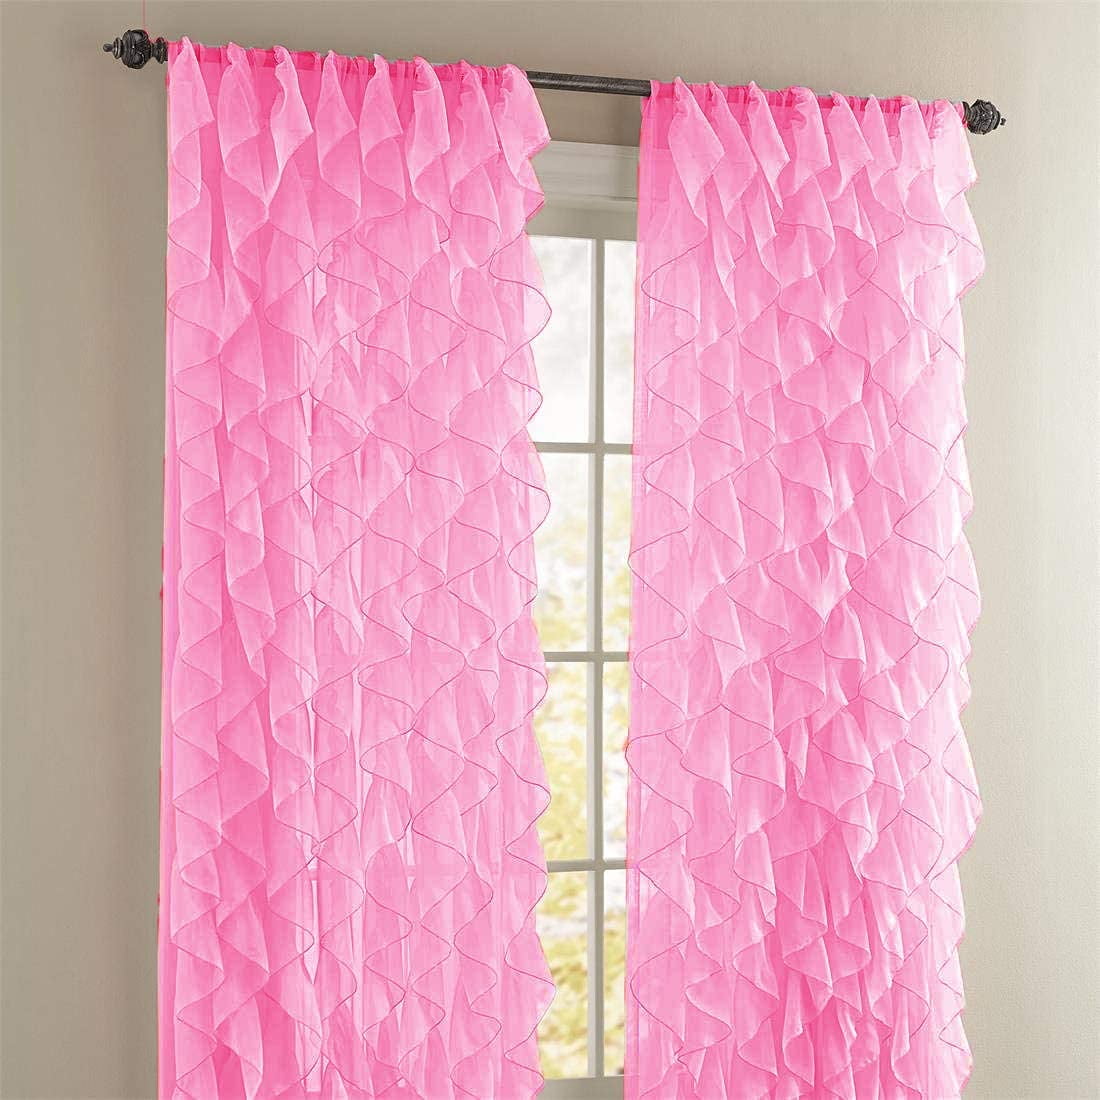 1pc sheer panel/voile/curtain PINK CHEETAH PRINT w/ rod pocket 84'' lenght 